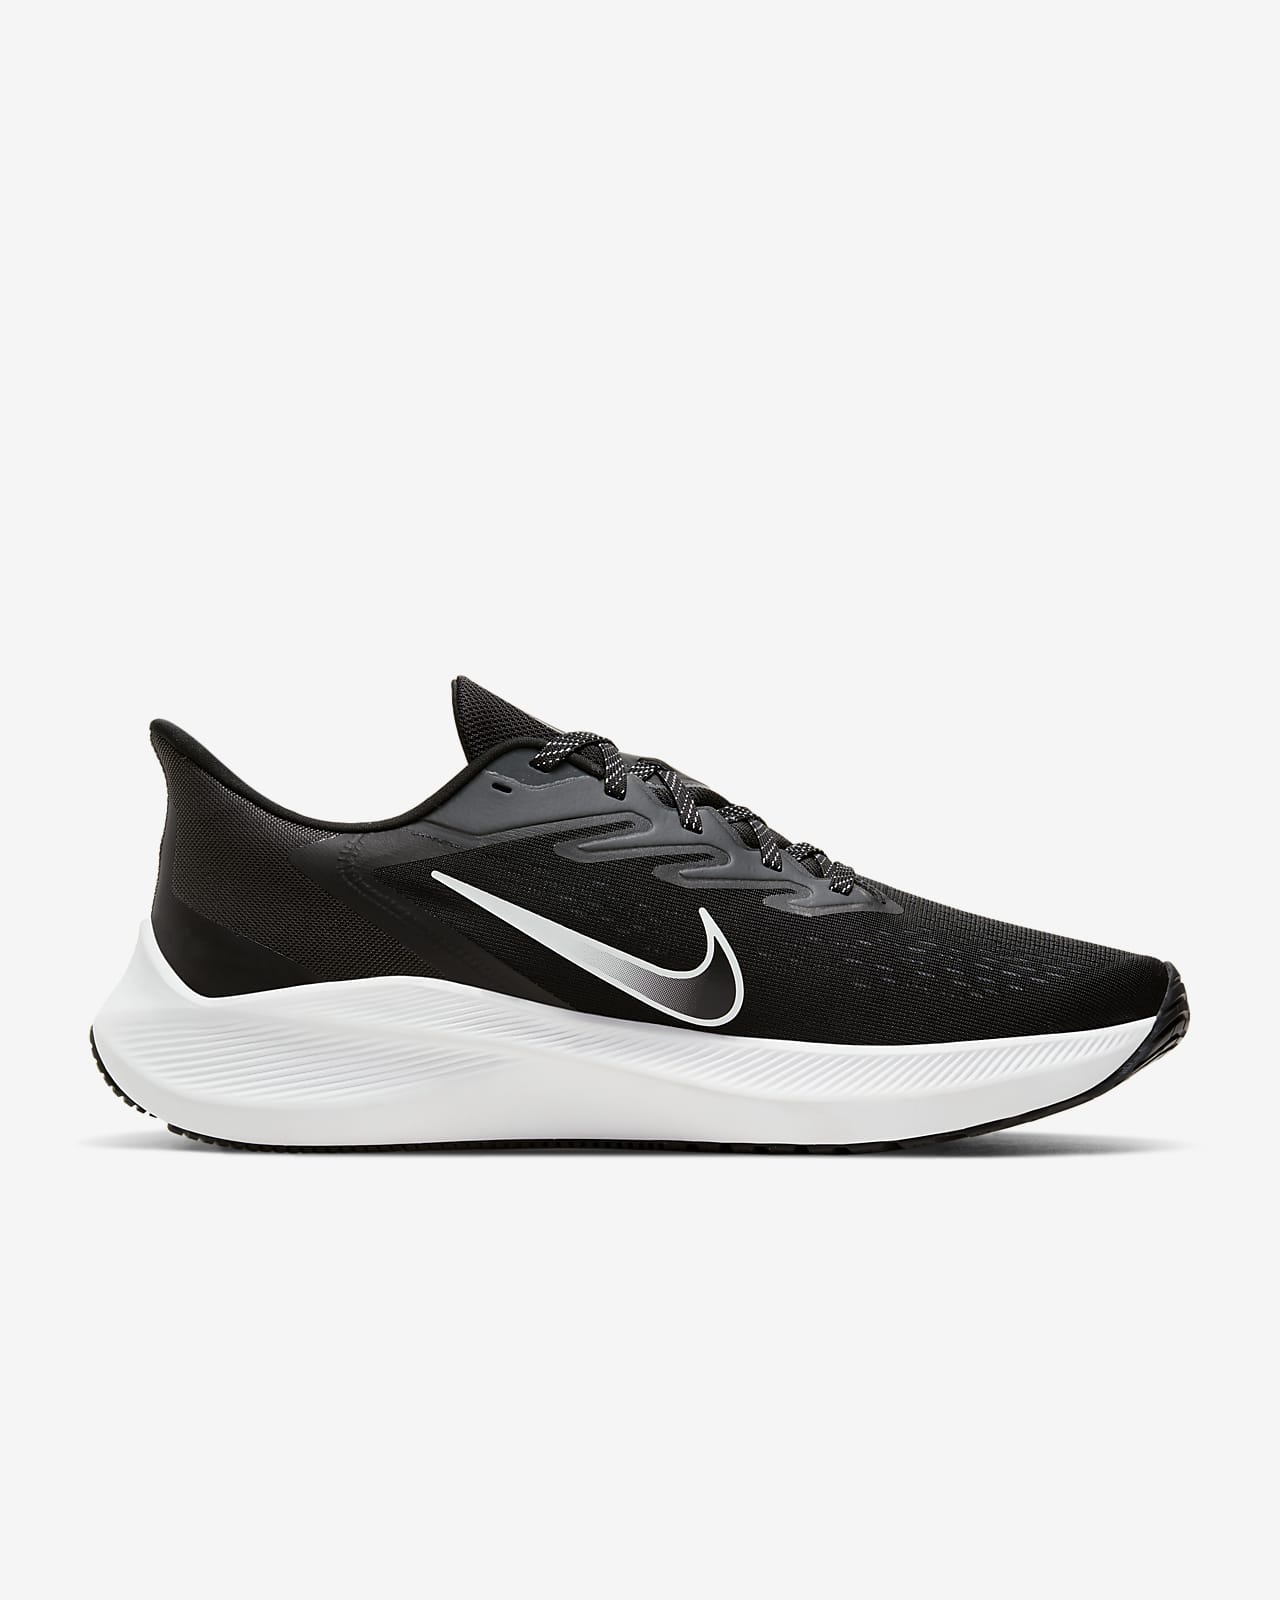 Nike Air Zoom Winflo 7 Men's Road Running Shoes